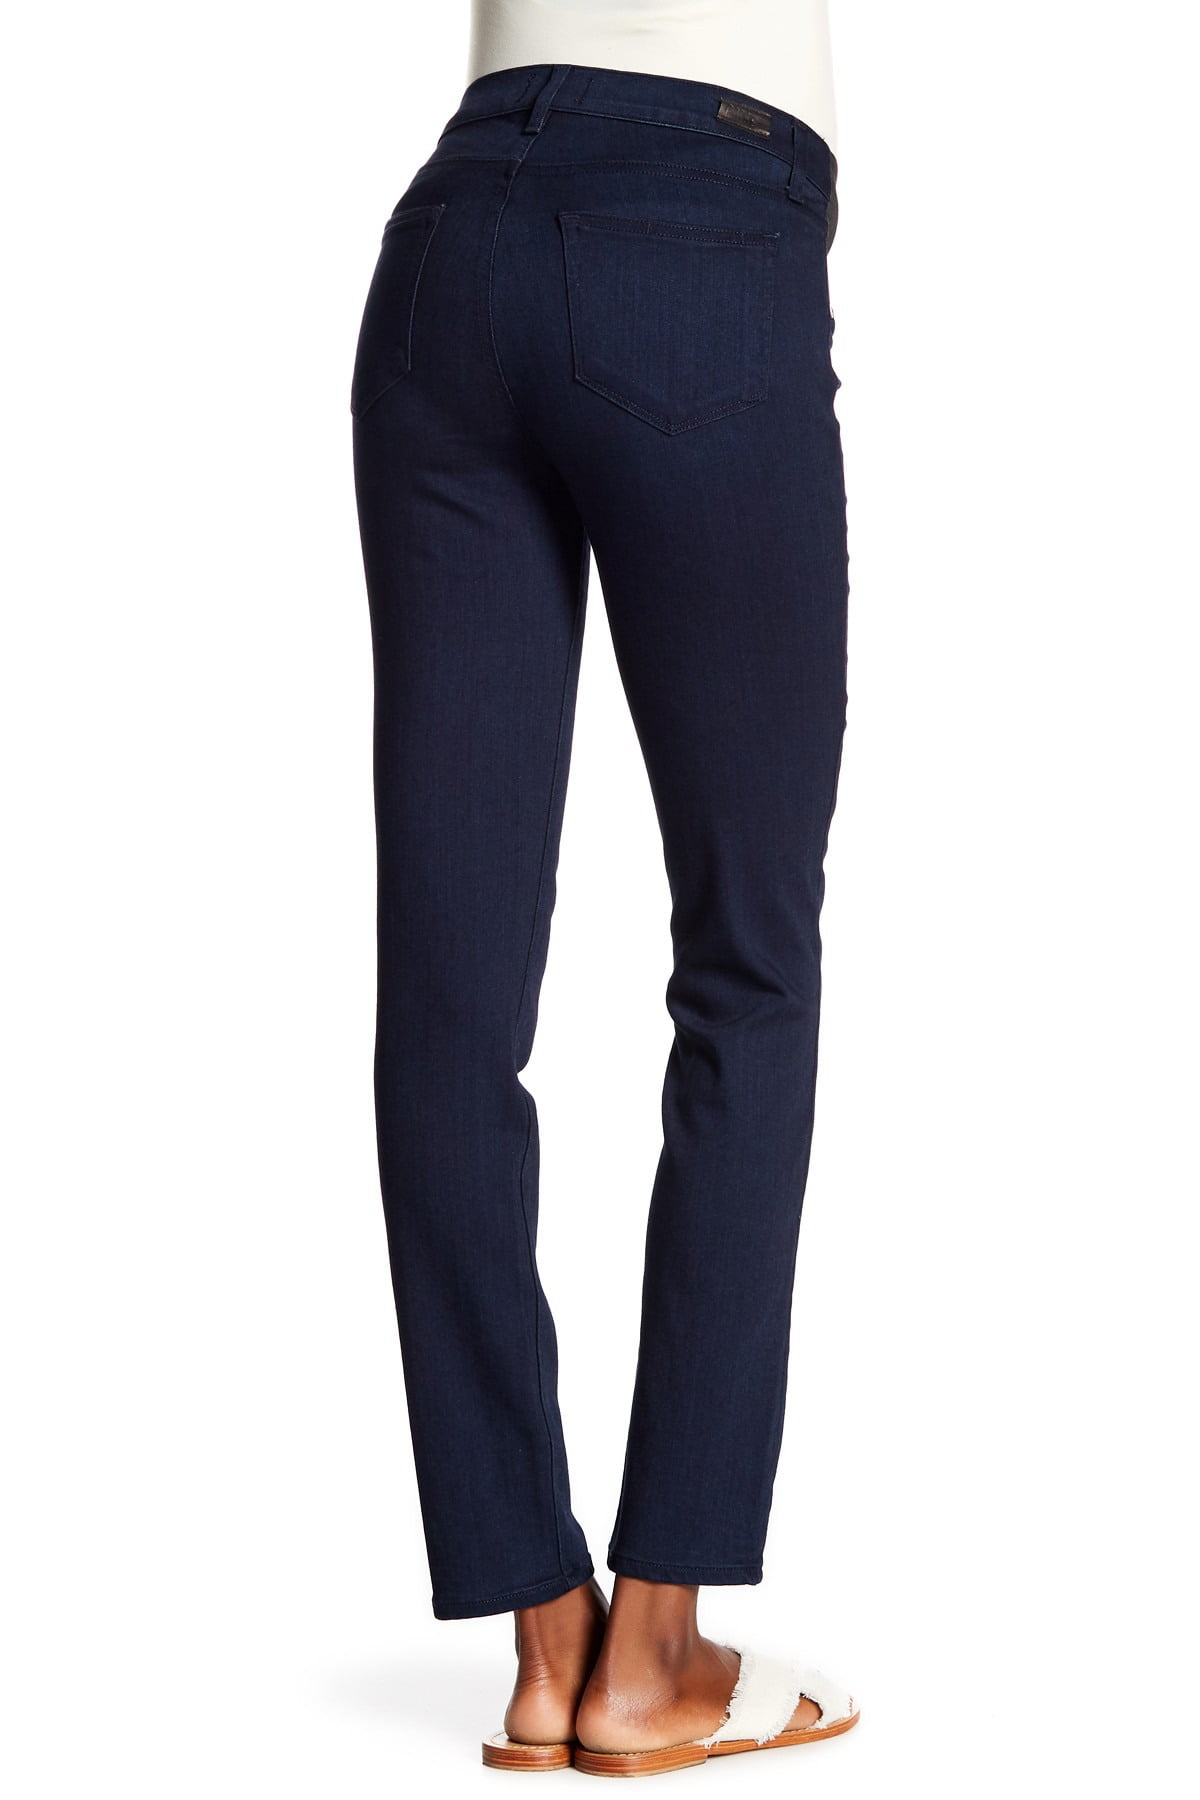 Skyline Skinny Maternity Jeans with Stretch Belly Panel in Tonal Rosalyn 31 